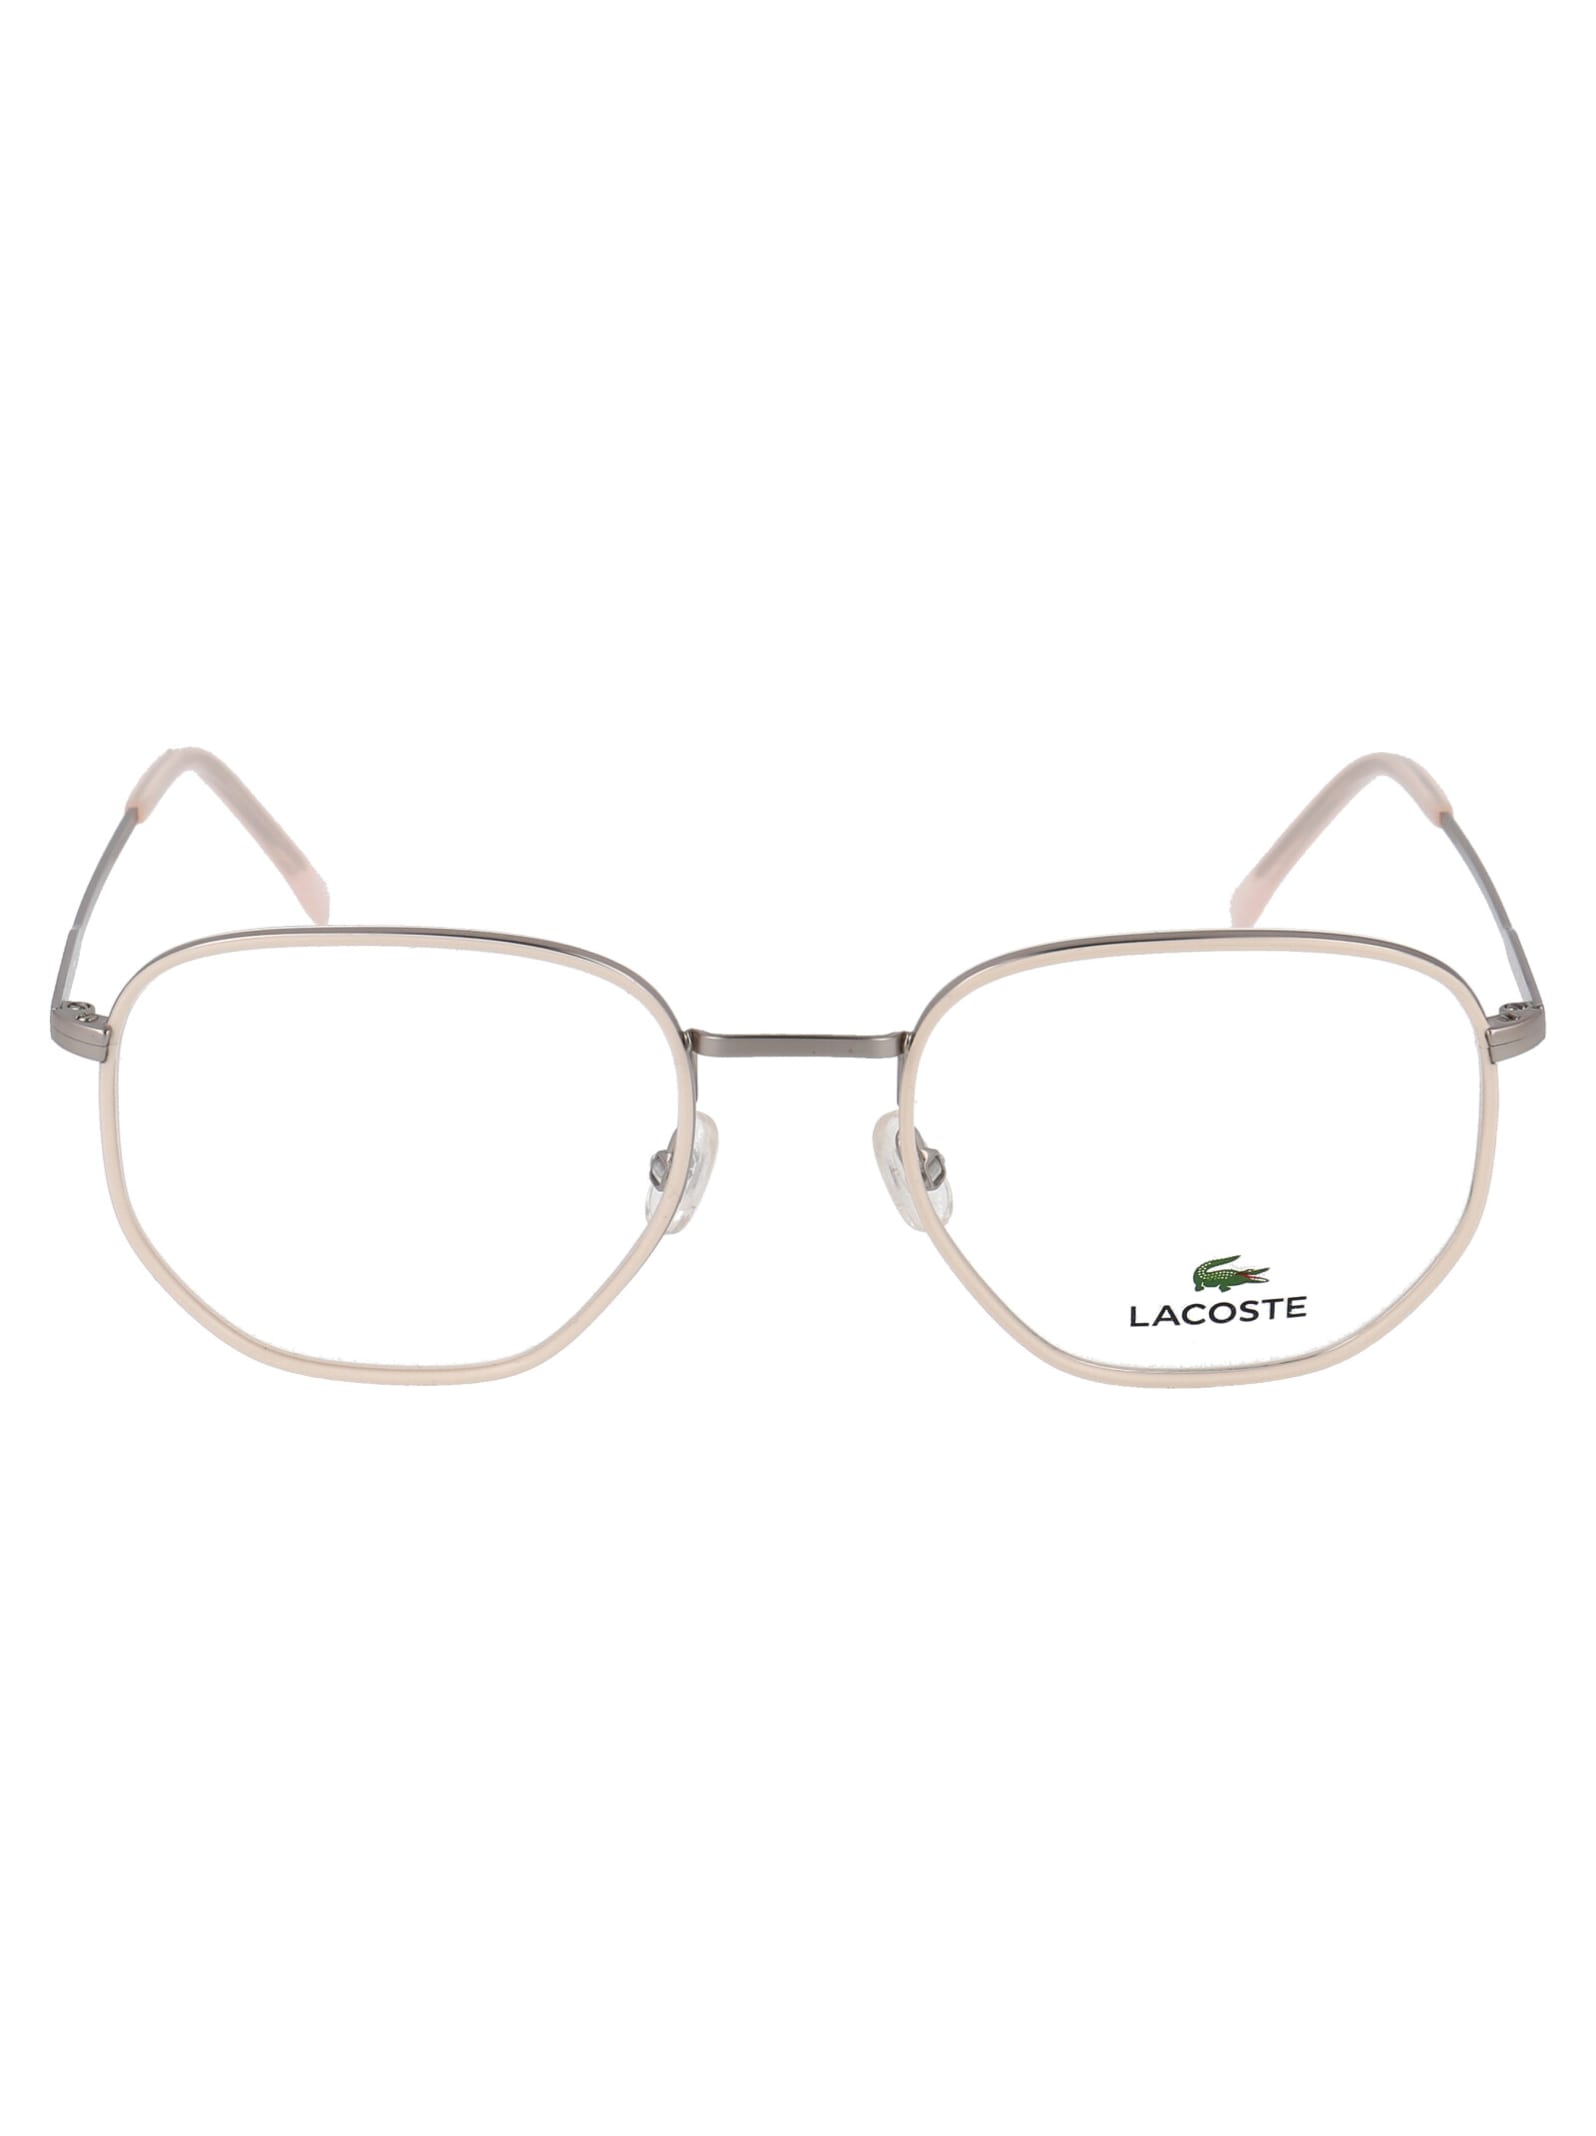 Lacoste L2253 Glasses In 045 Silver Nude Pink